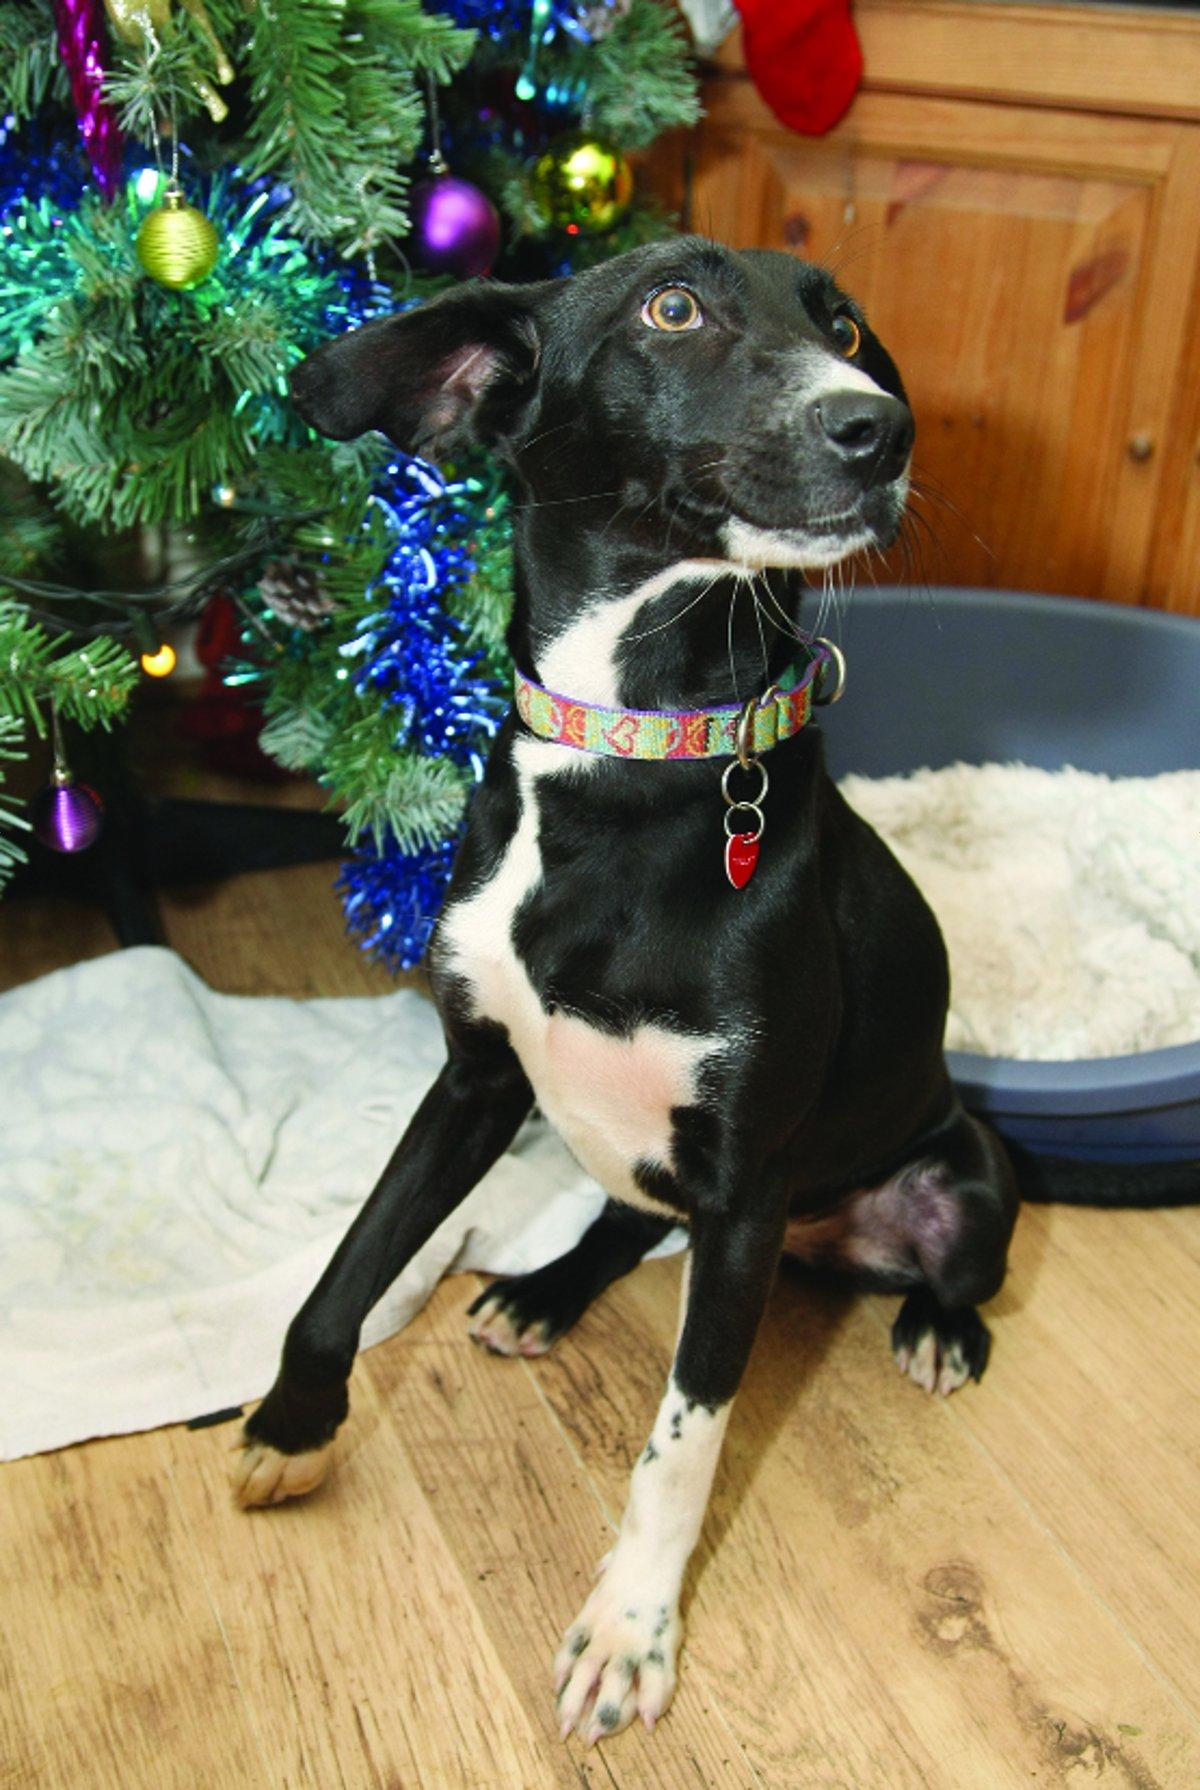 Can you give a dog a new life?
“Holly is a collie whippet cross. She is just over a year old. She was given up because her family’s circumstances changed. She would need a loving and boisterous family.